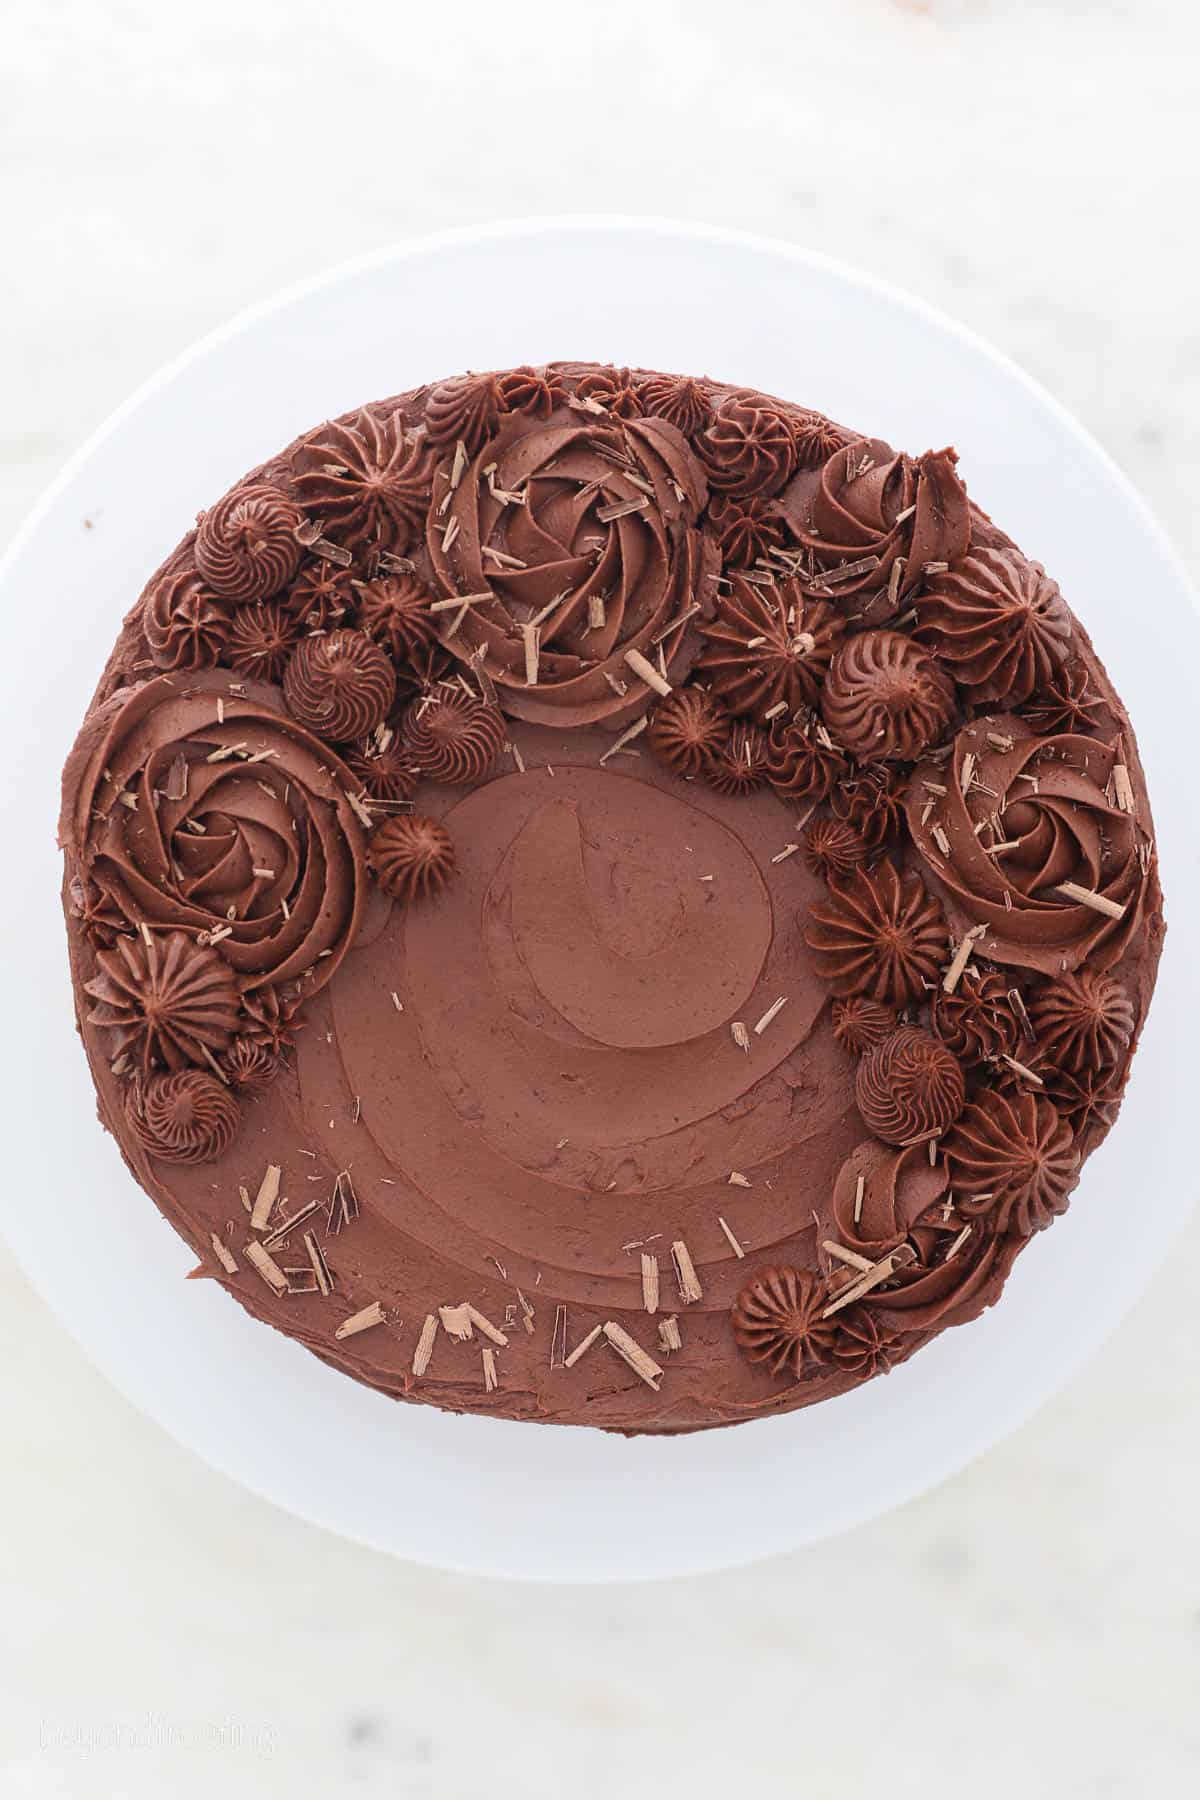 Overhead view of a frosted marble cake decorated with piped chocolate buttercream roses, swirls, and shaved chocolate.